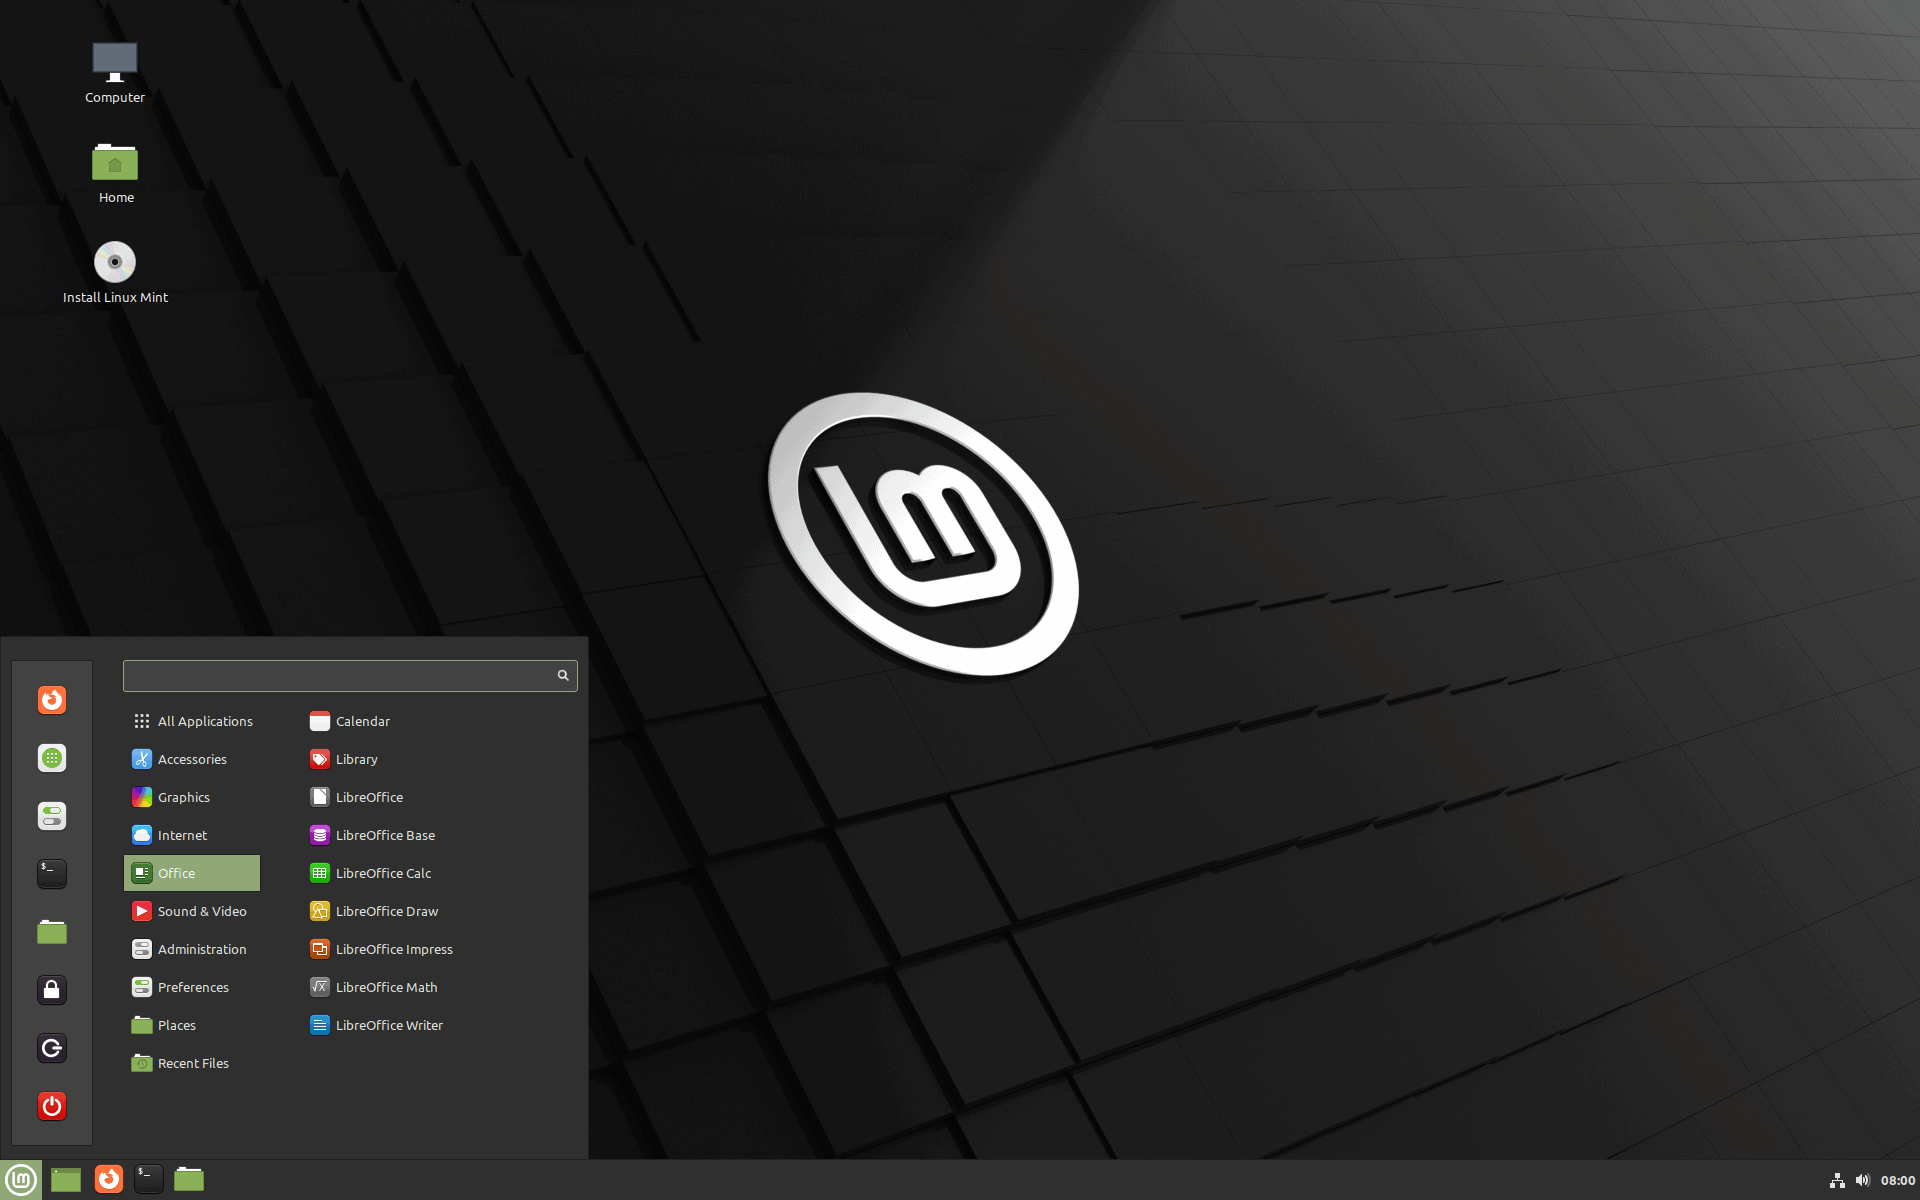 Linux Mint 21 is now available